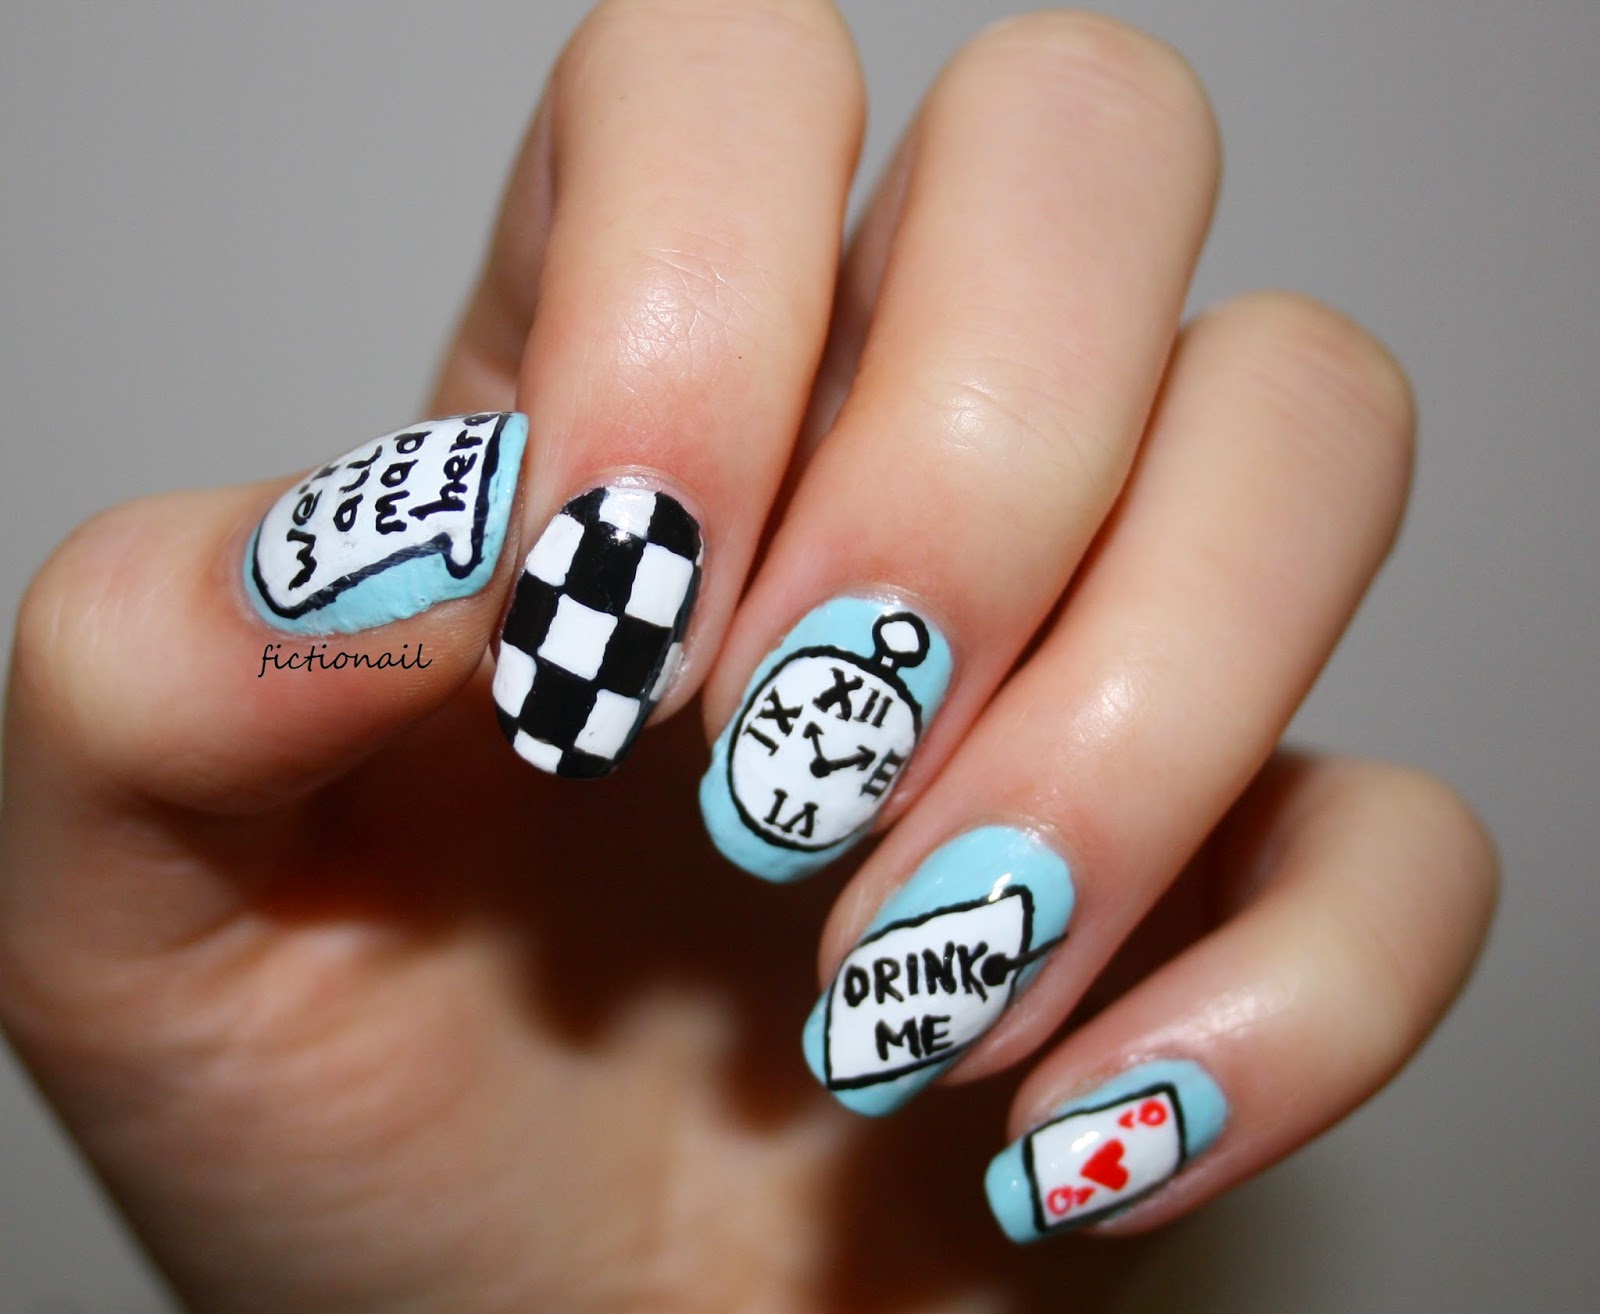 1. "Alice in Wonderland" themed nail art tutorial by cutepolish - wide 8